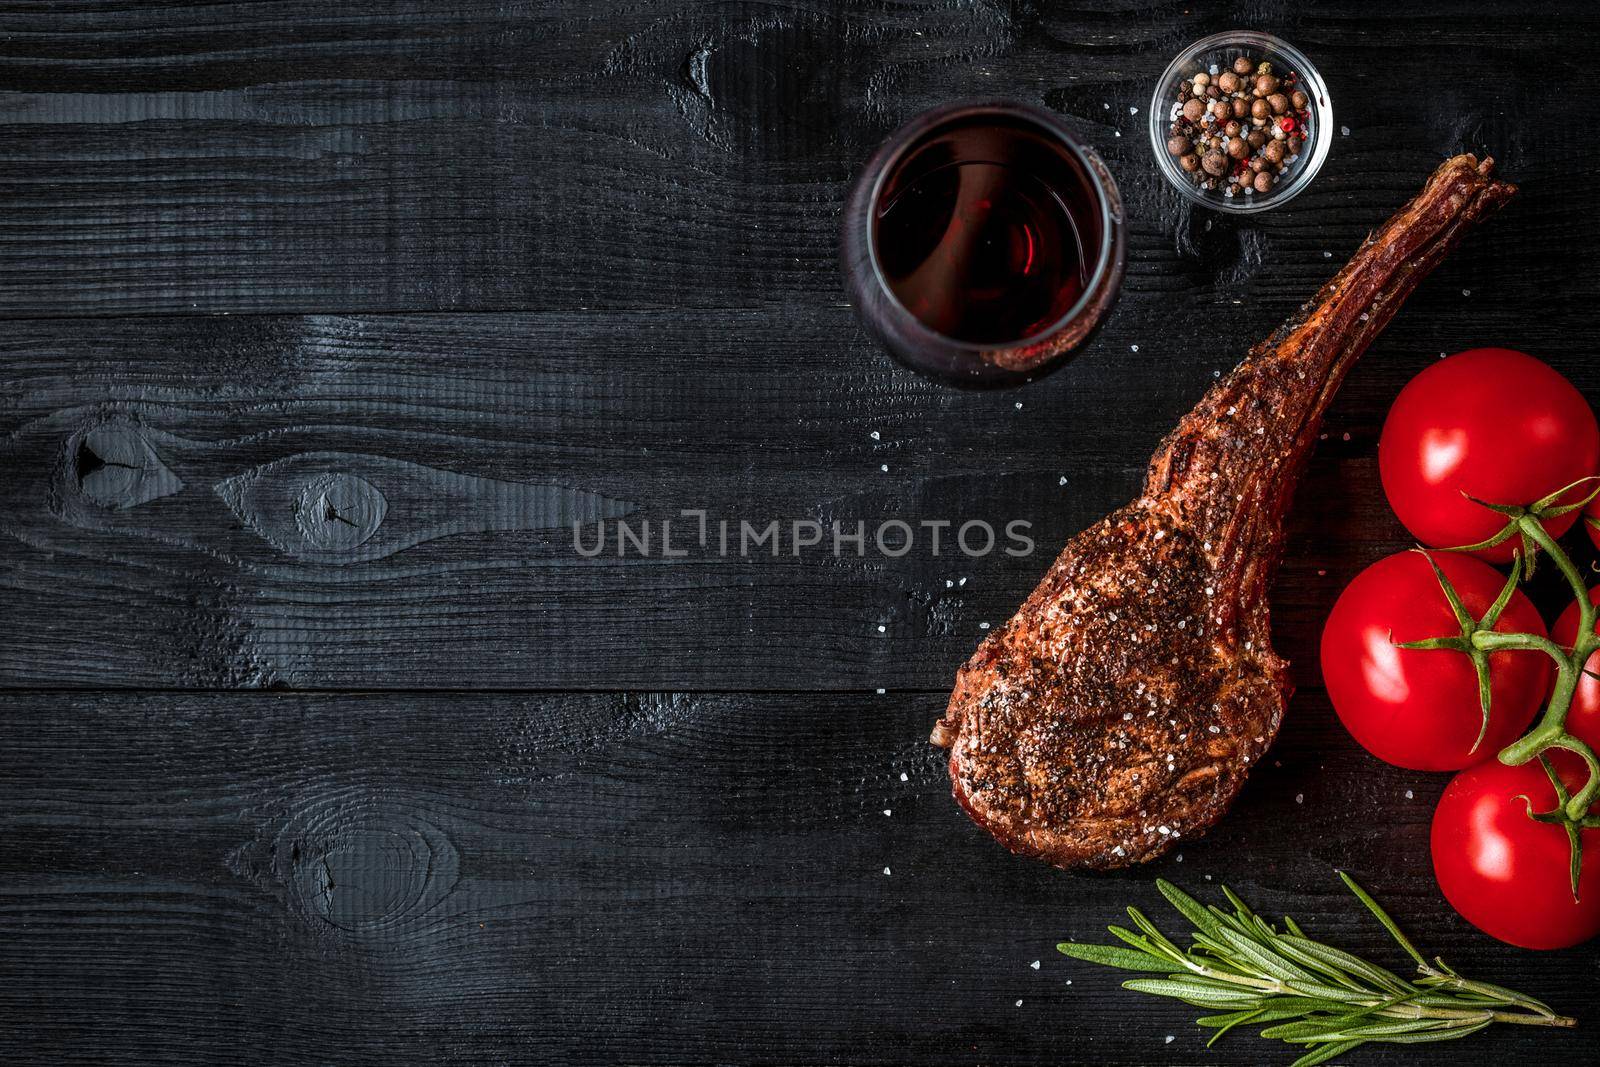 Barbecue dry aged rib of beef with spice, vegetables and glass of red wine close-up on black wooden background. Top view. Copy space. Still life. Flat lay